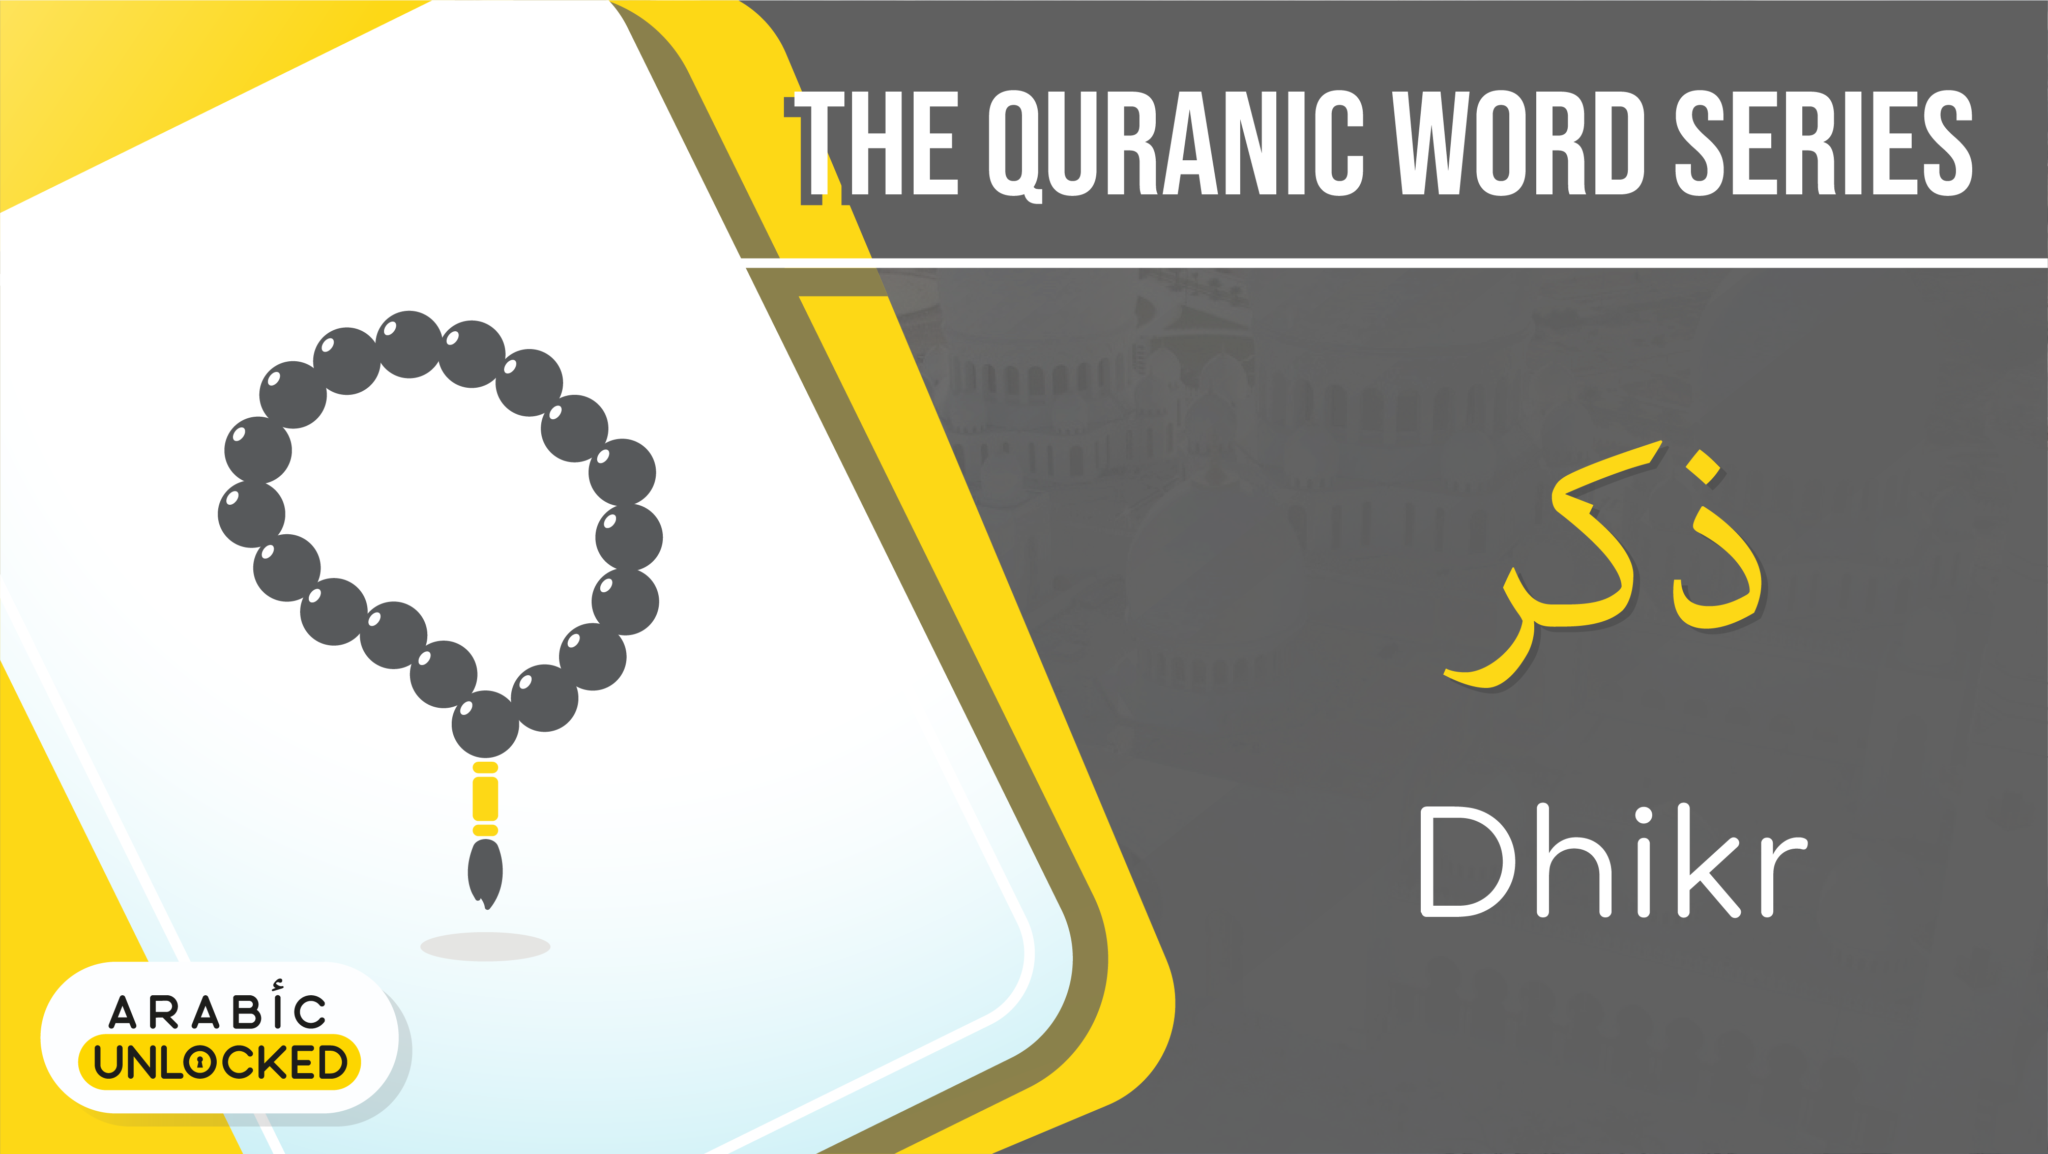 The Quranic Word Series: Dhikr